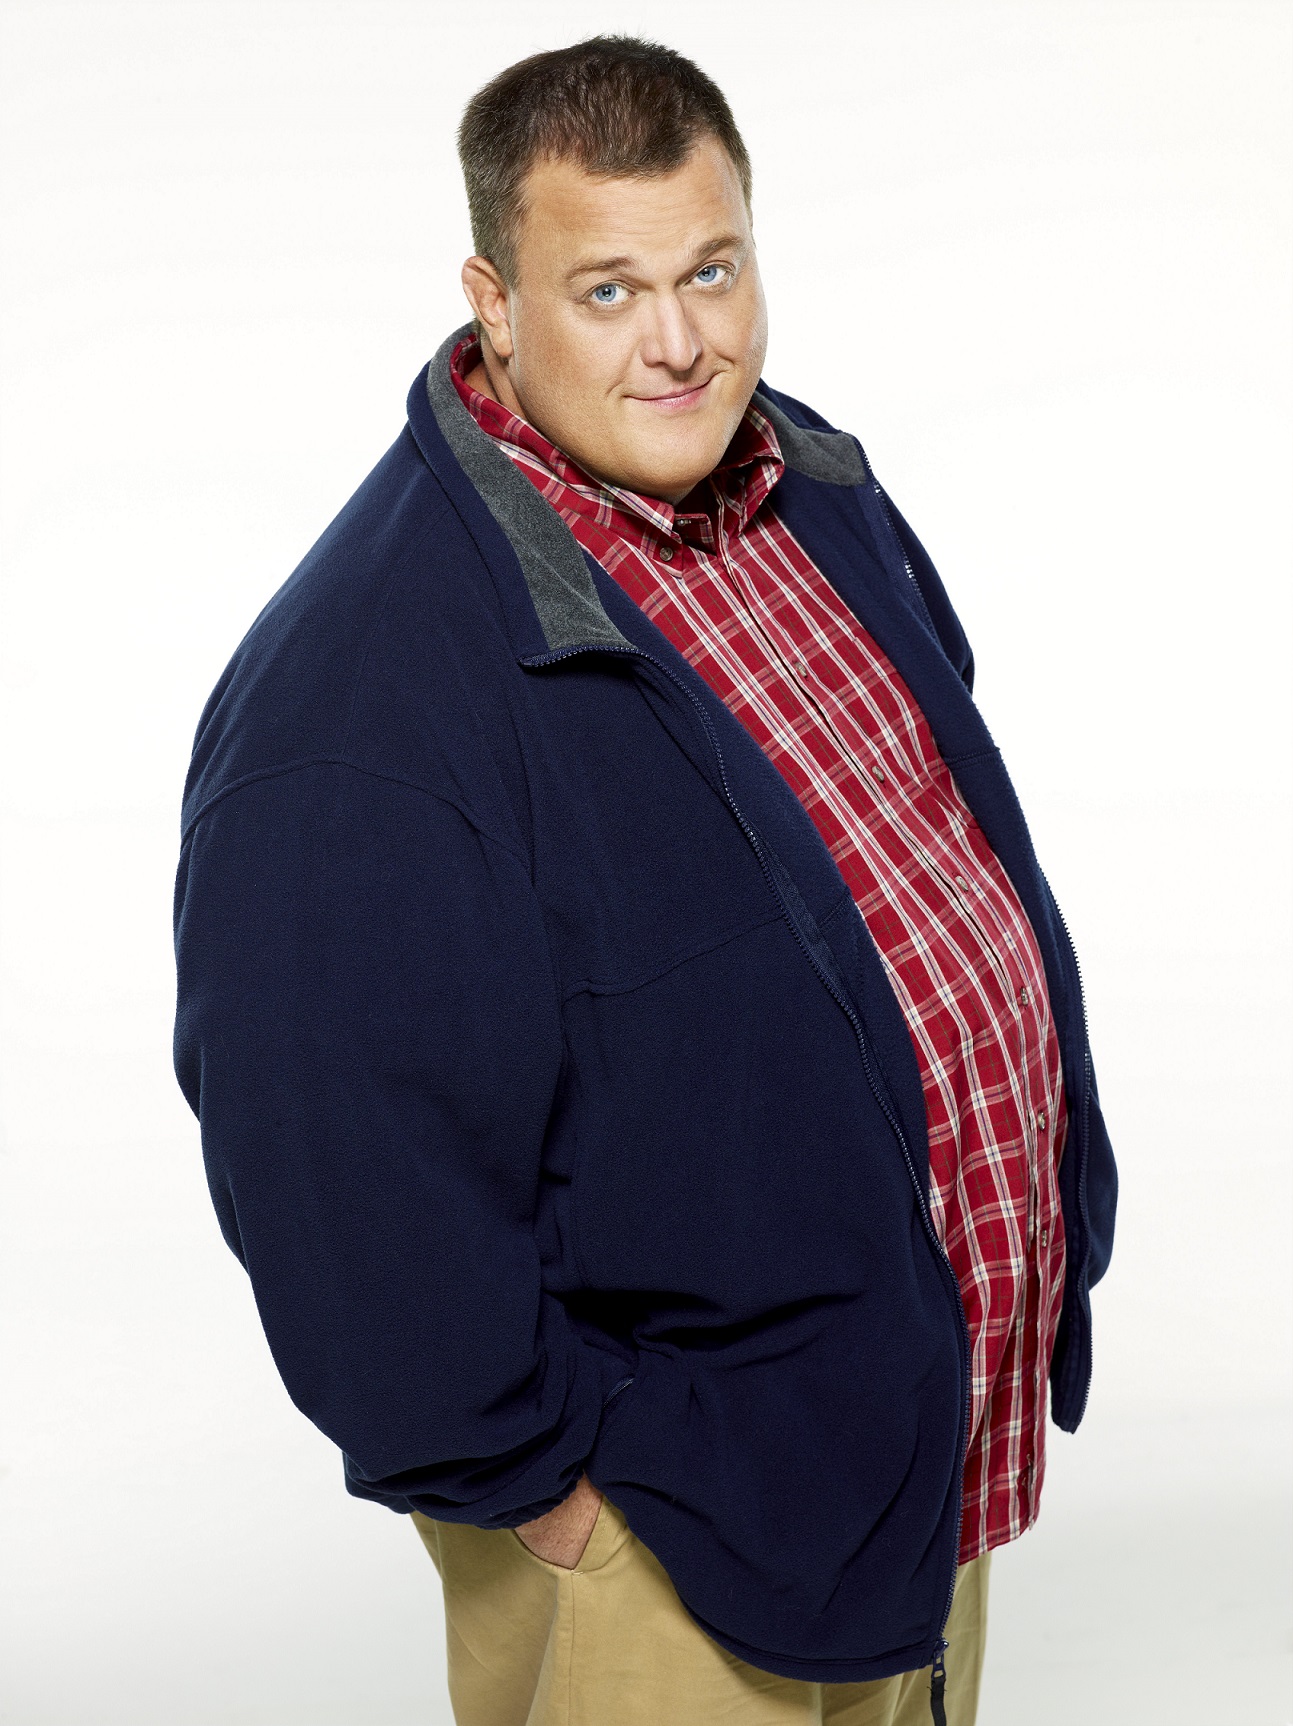 Mike Billy Gardell